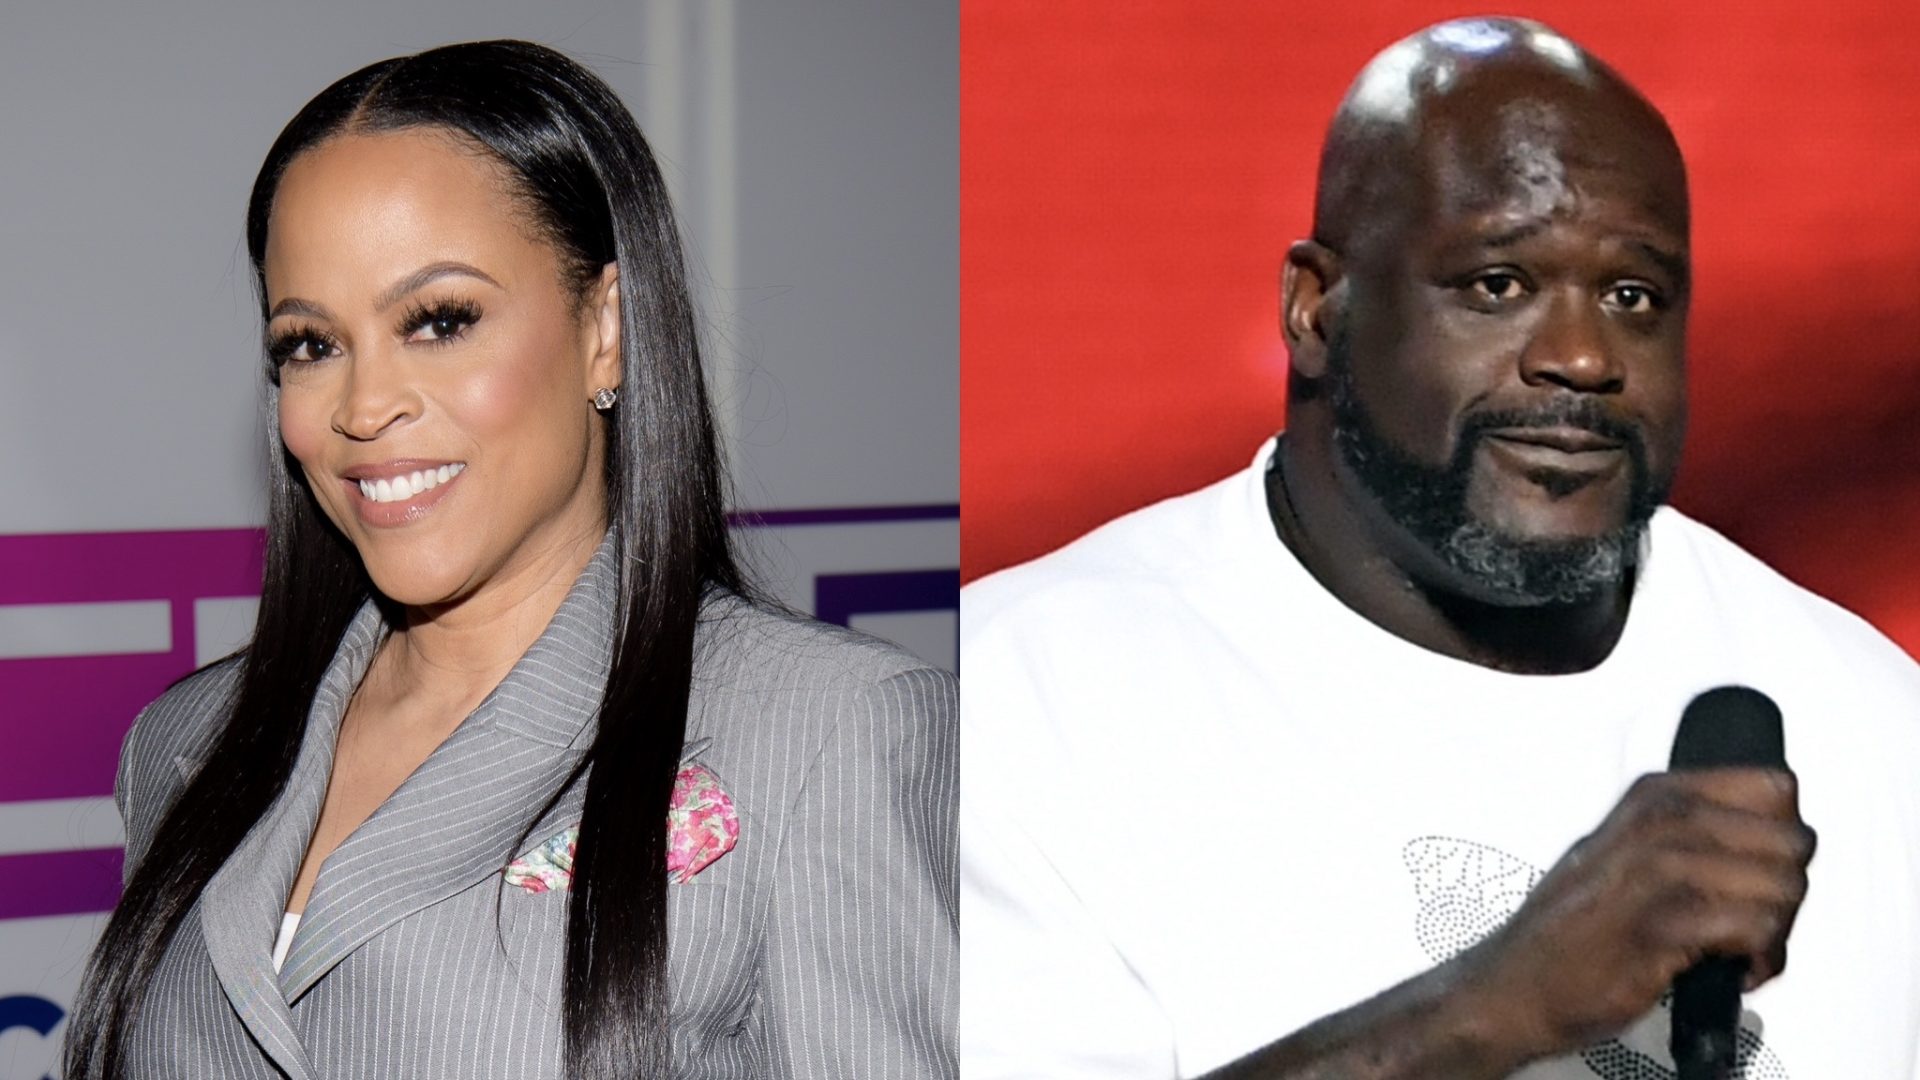 Shaunie Henderson Speaks Out After Going Viral For Saying She Doesn't Know If She Was "Ever Really In Love" With Shaq